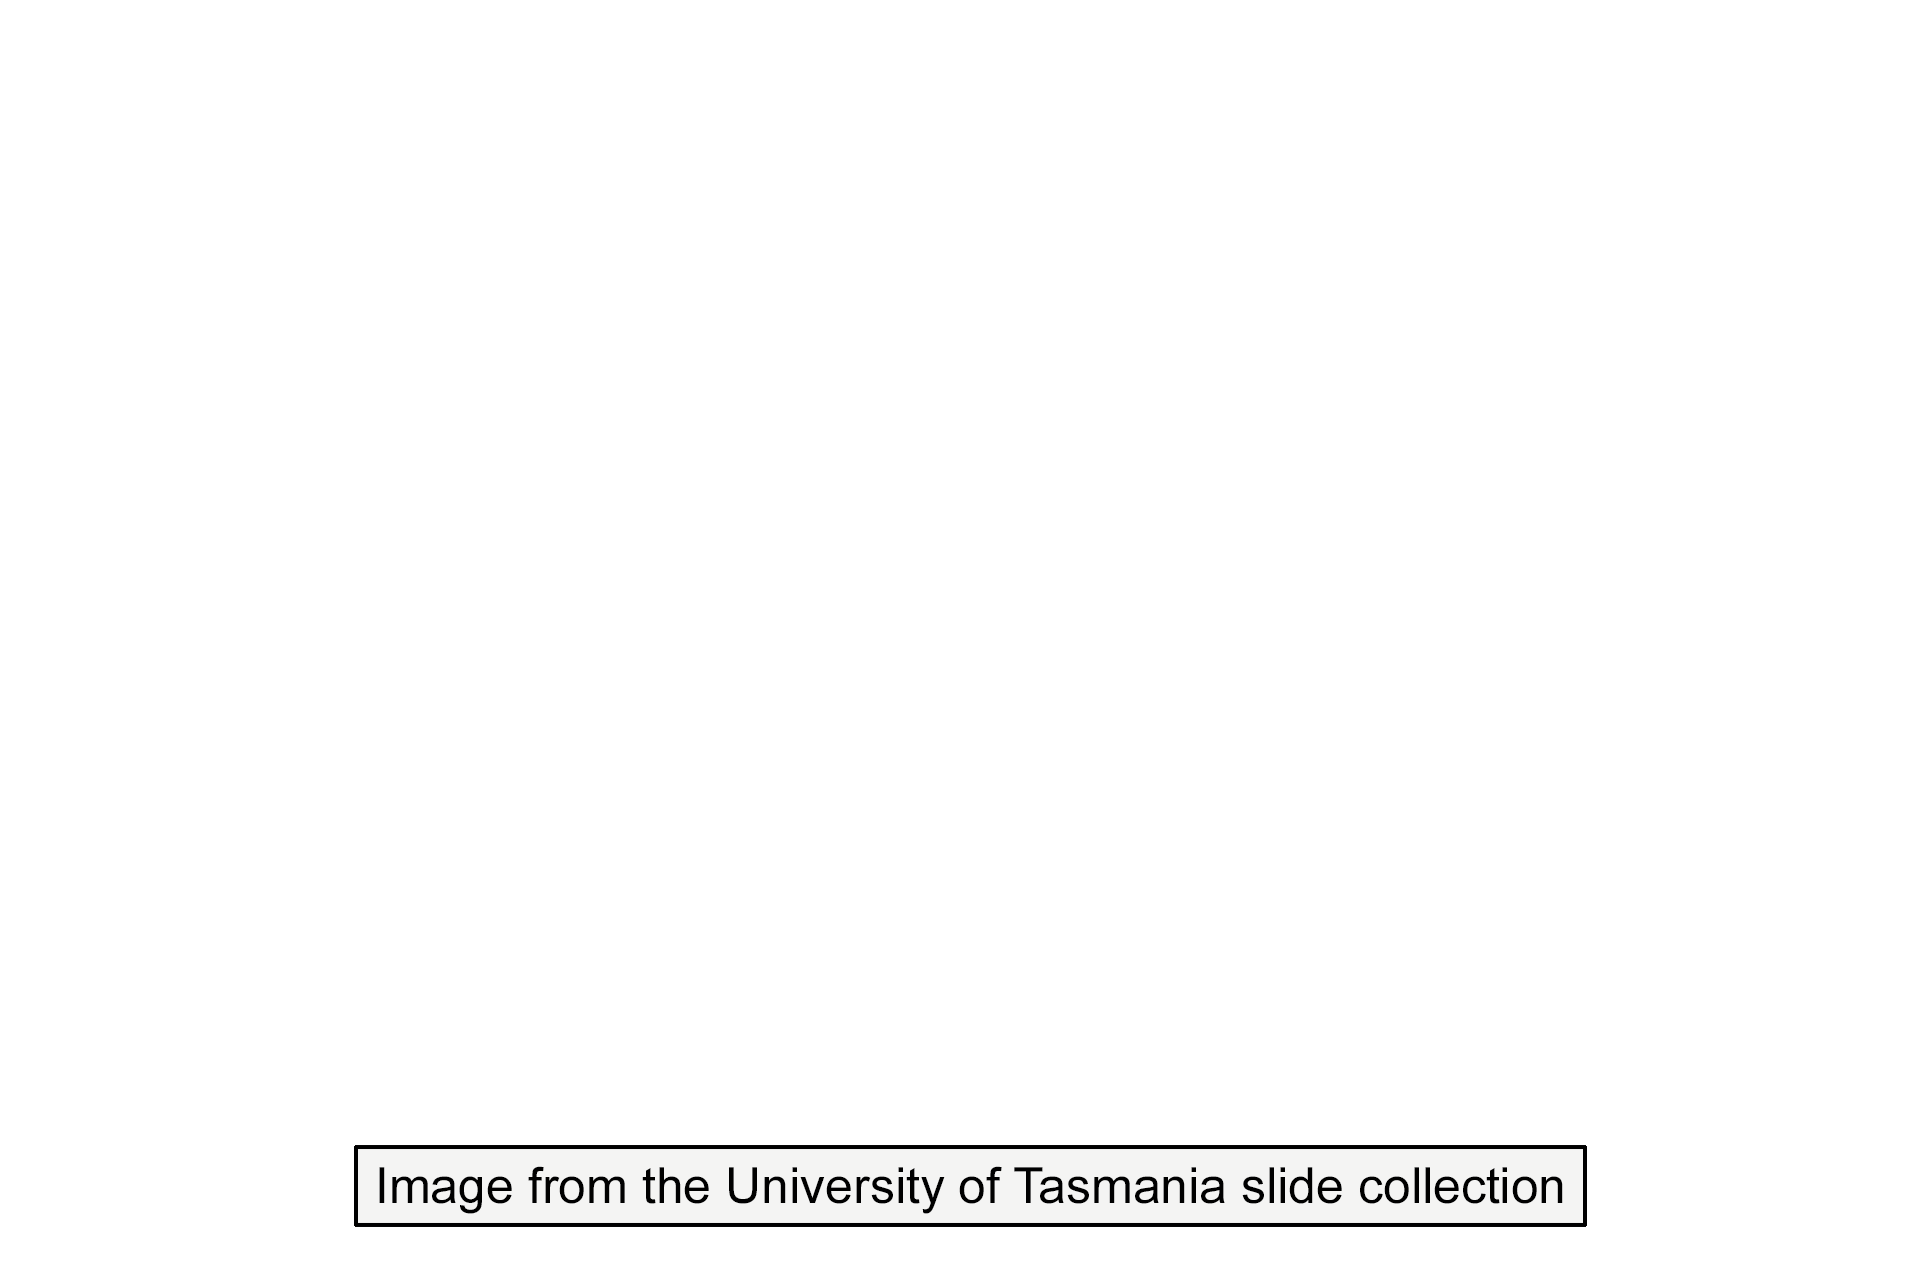 Image source > <p>This image was taken from a slide in the University of Tasmania slide collection.</p>
